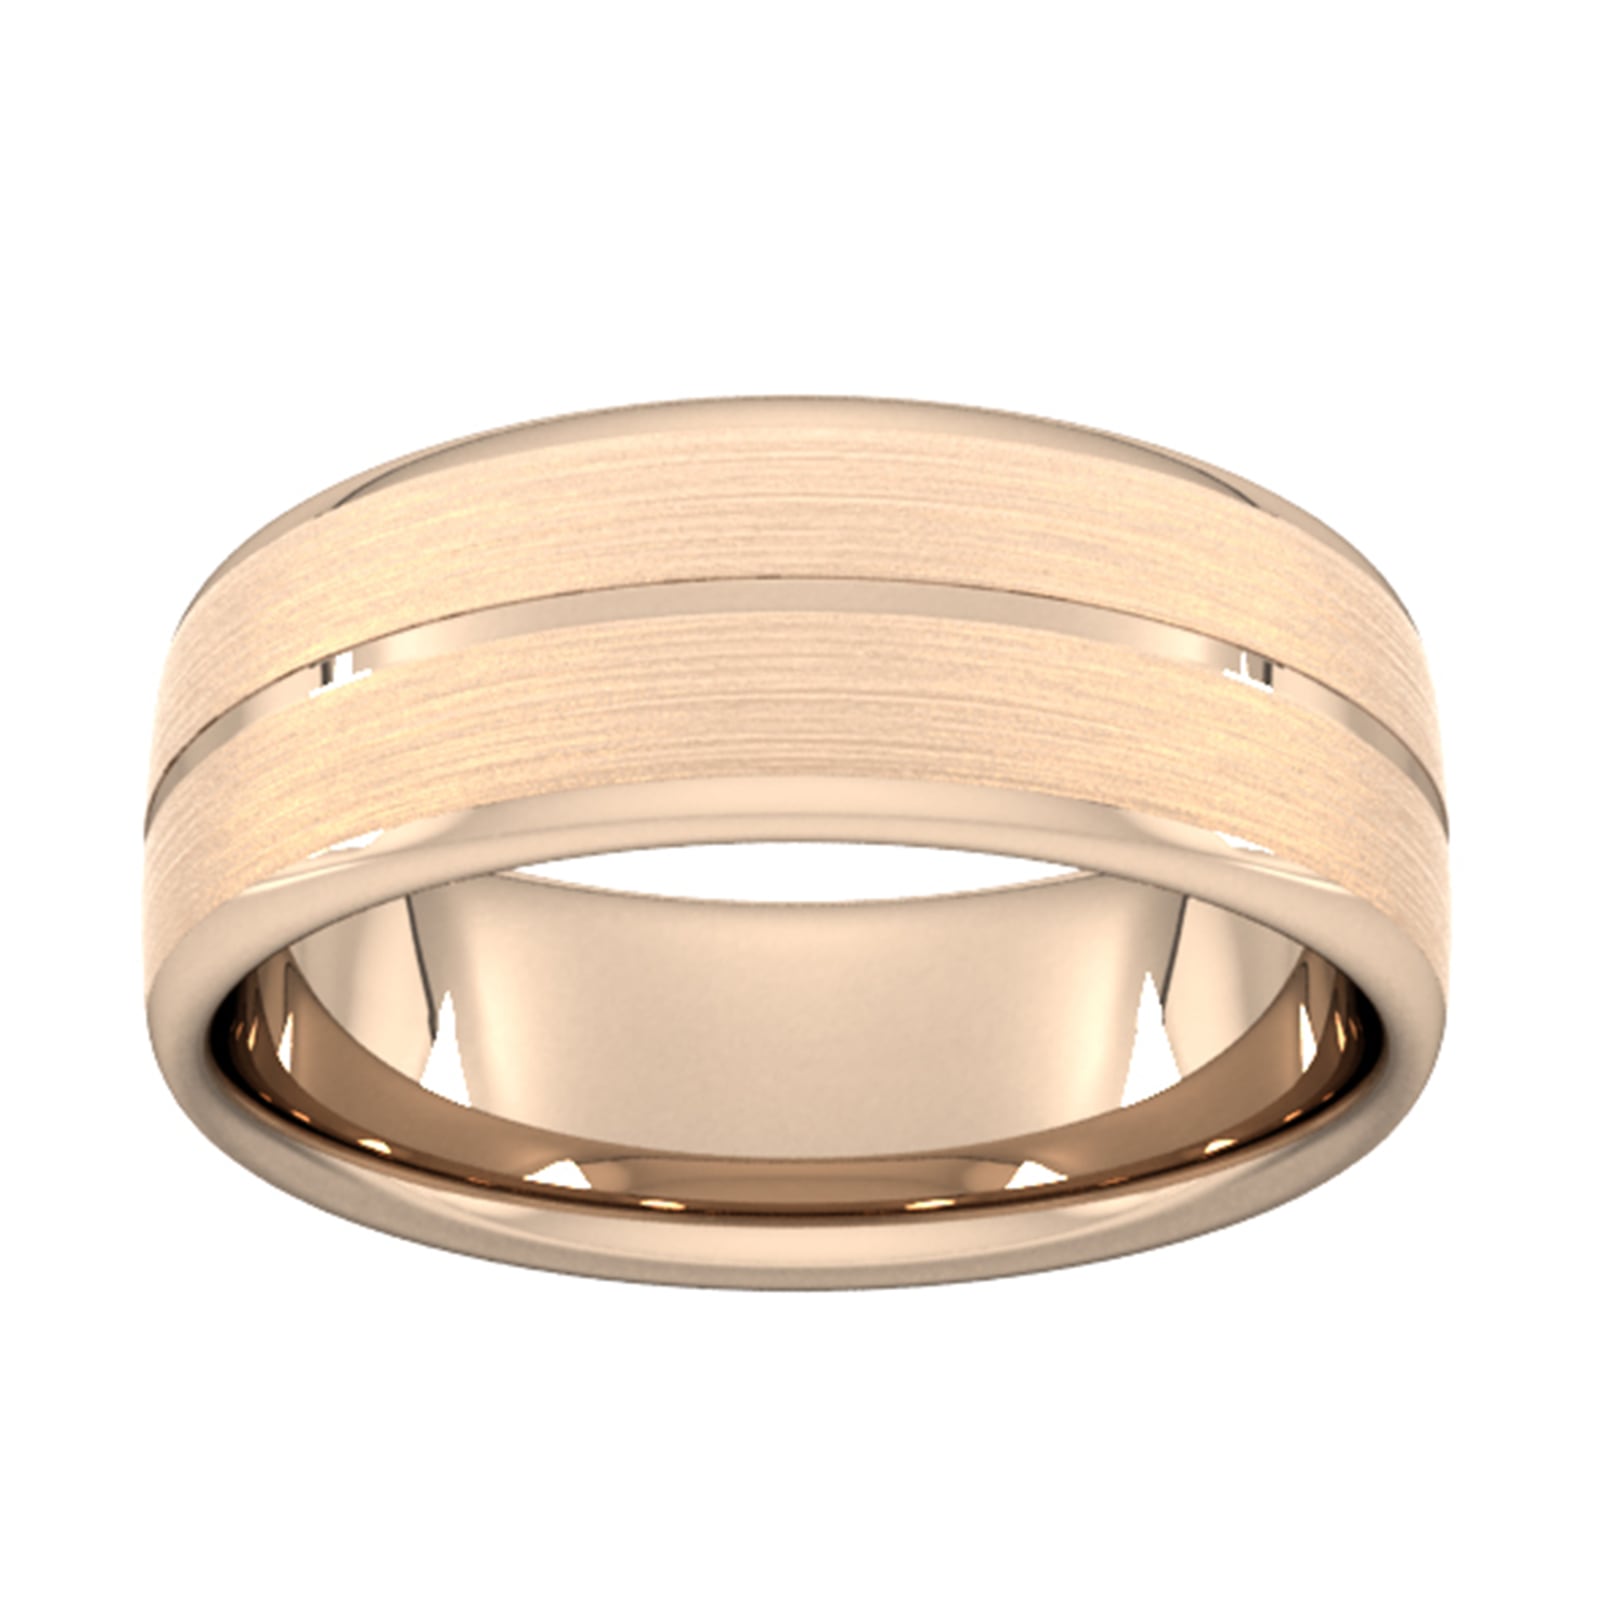 8mm Traditional Court Heavy Centre Groove With Chamfered Edge Wedding Ring In 9 Carat Rose Gold - Ring Size W